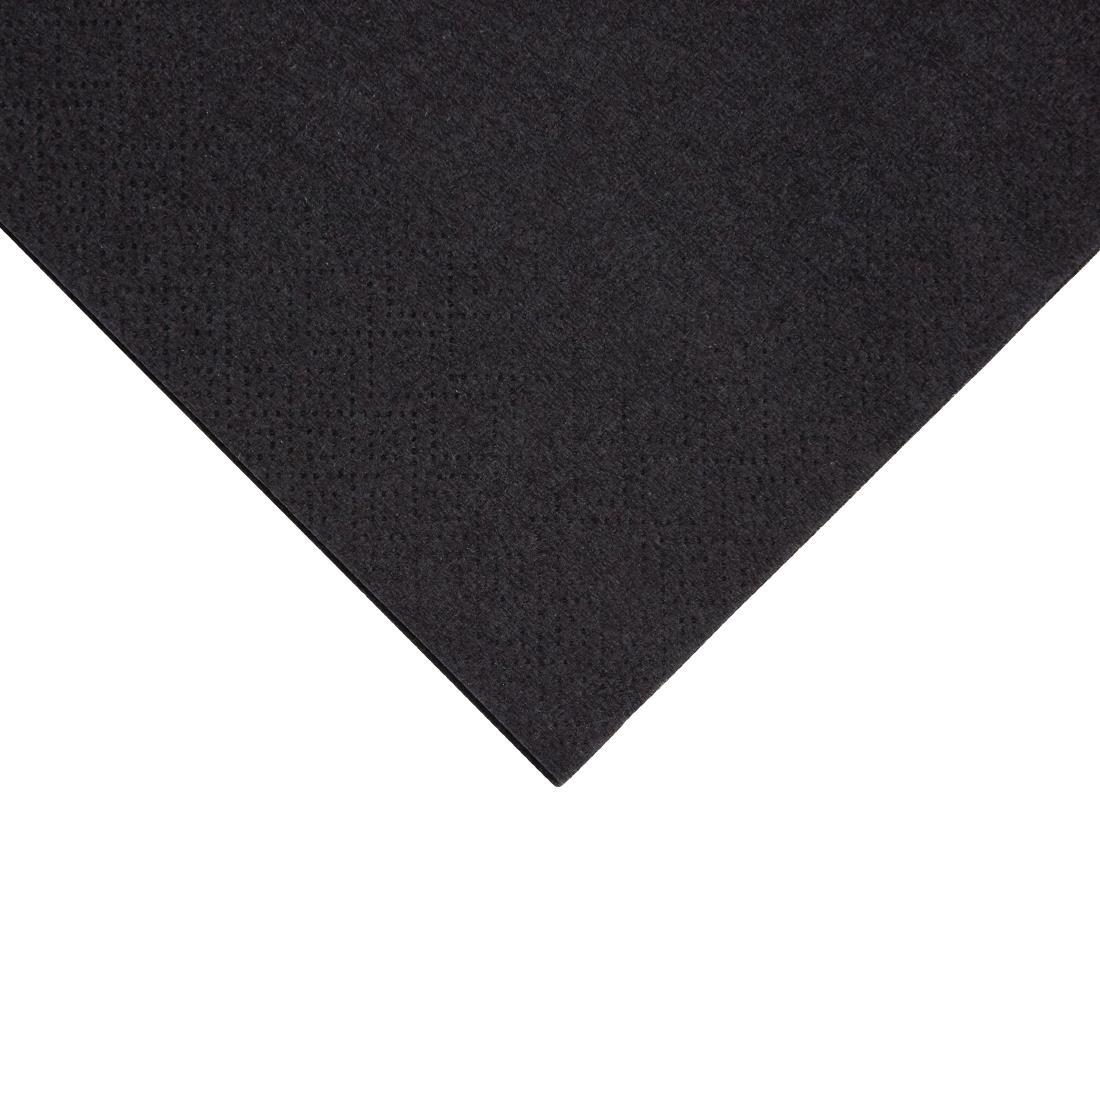 Fiesta Recyclable Cocktail Napkin Black 24x24cm 2ply 1/4 Fold (Pack of 4000) - FE218  - 2